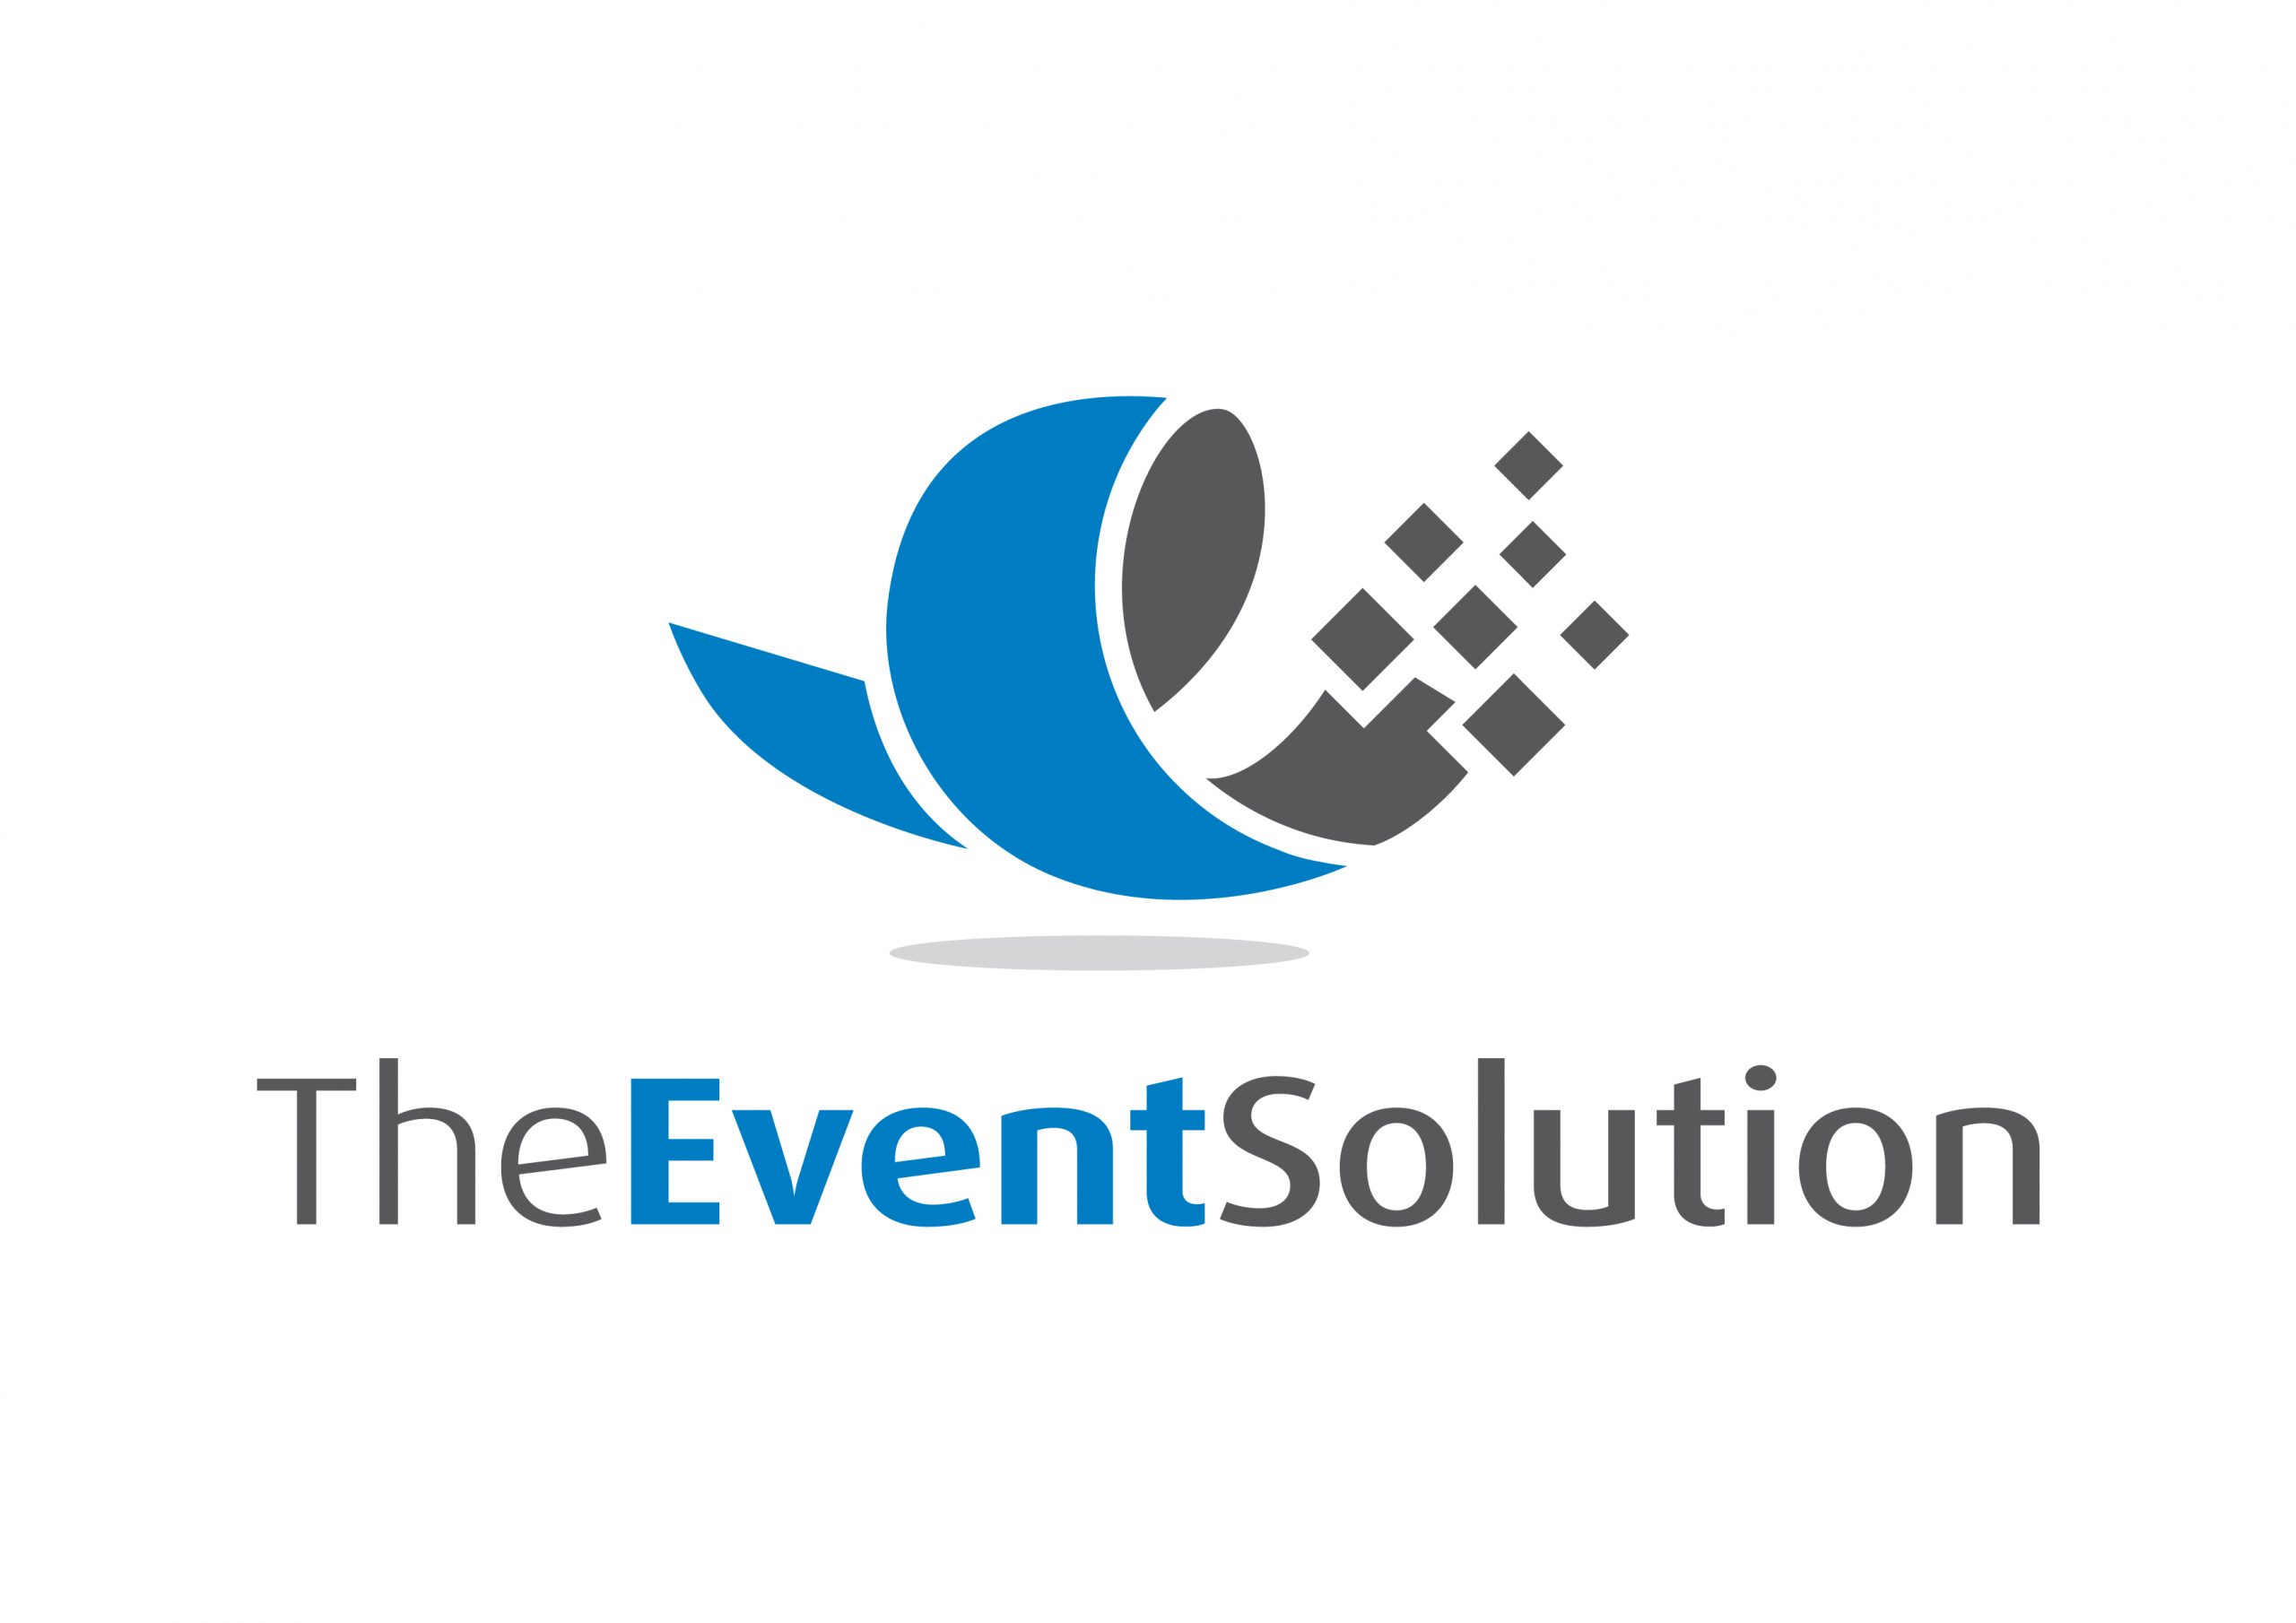 The Event Solution